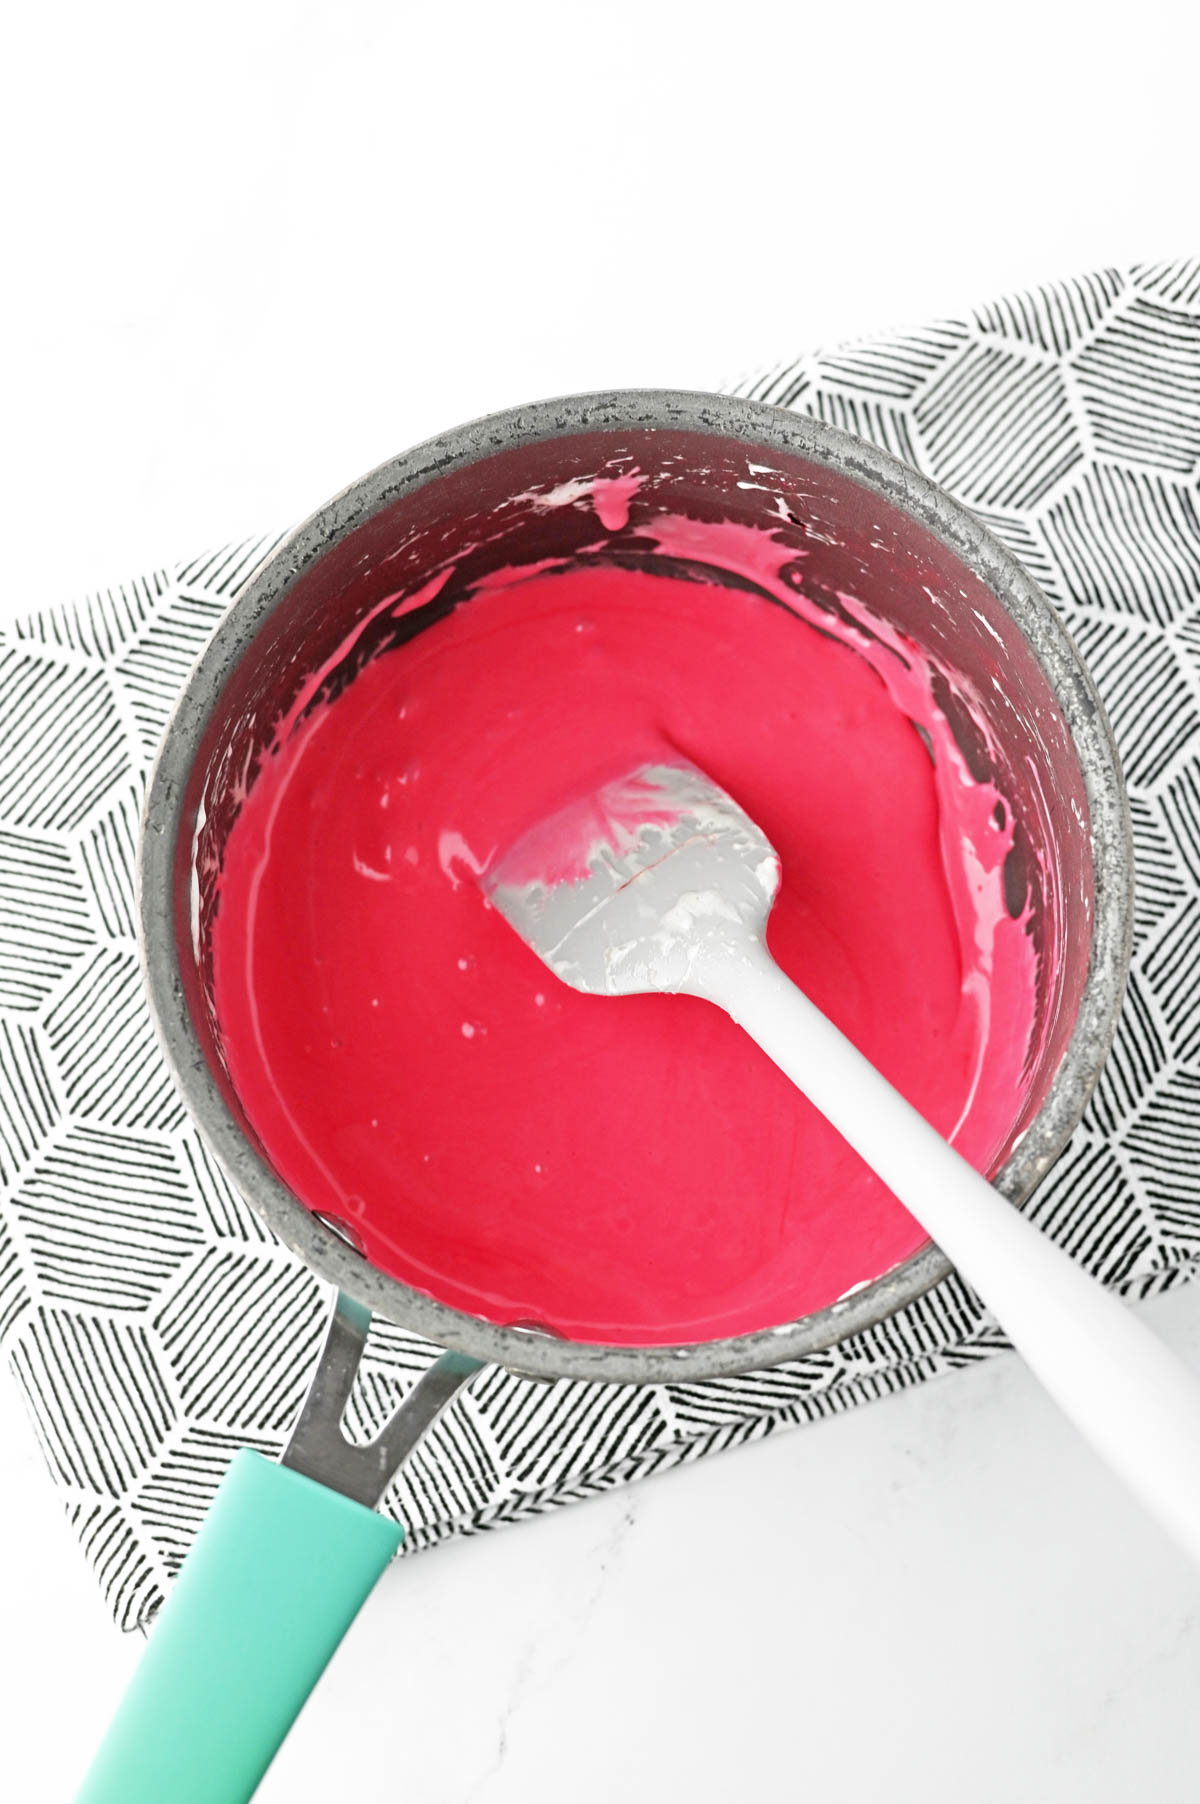 Red food coloring added to melted marshmallows